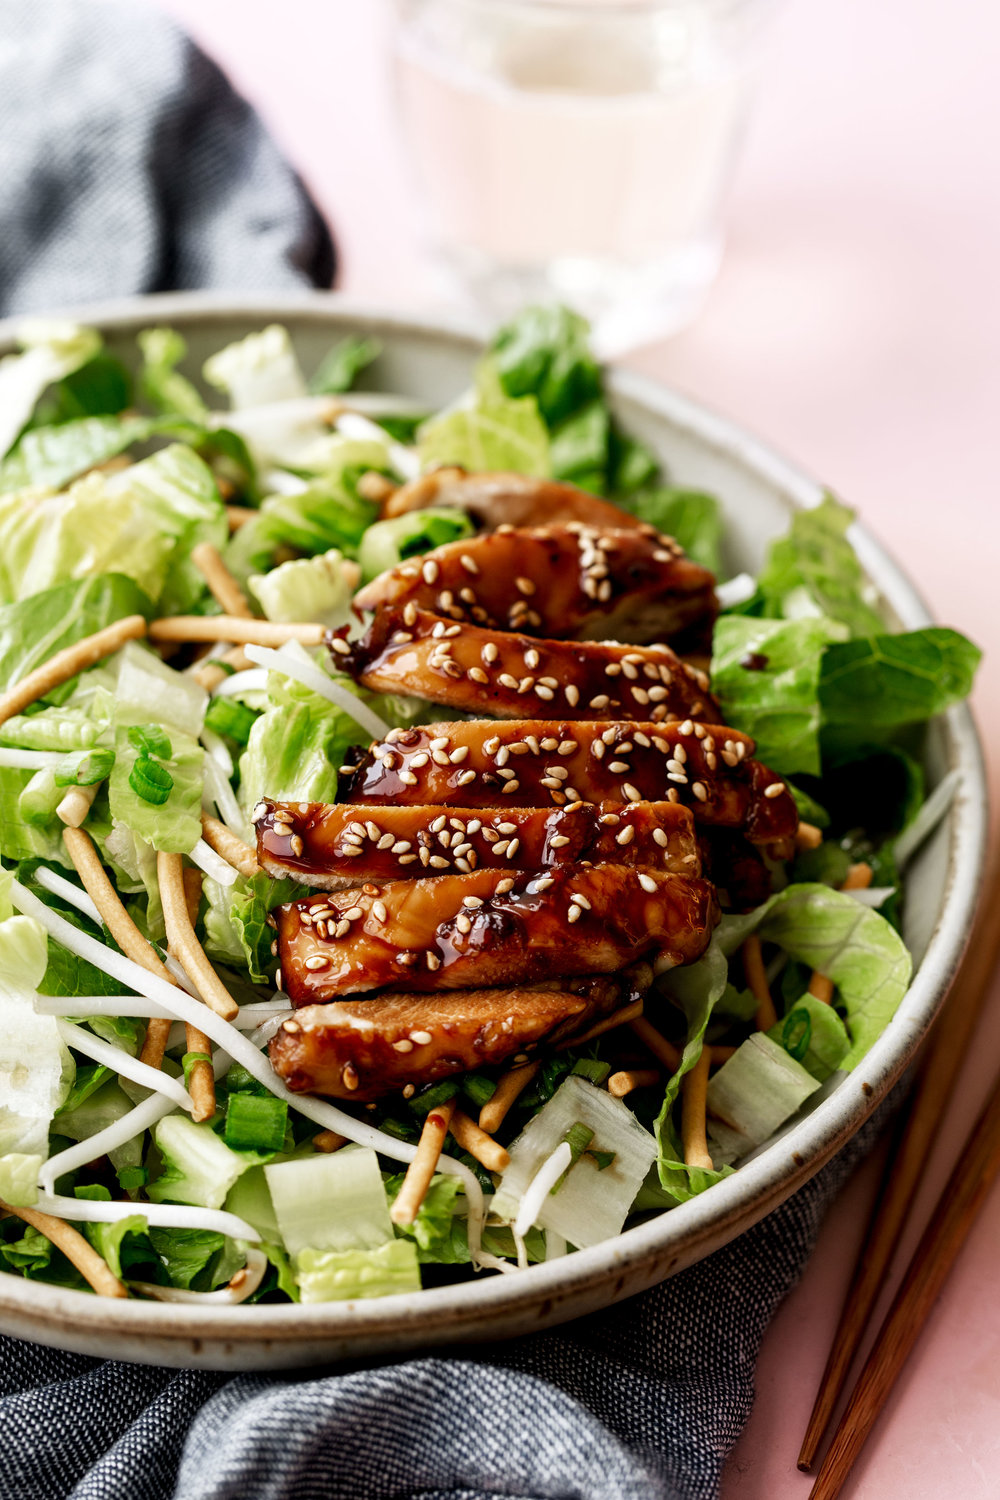 Crispy Teriyaki Chicken Salad recipe from Cooking with Cocktail rings